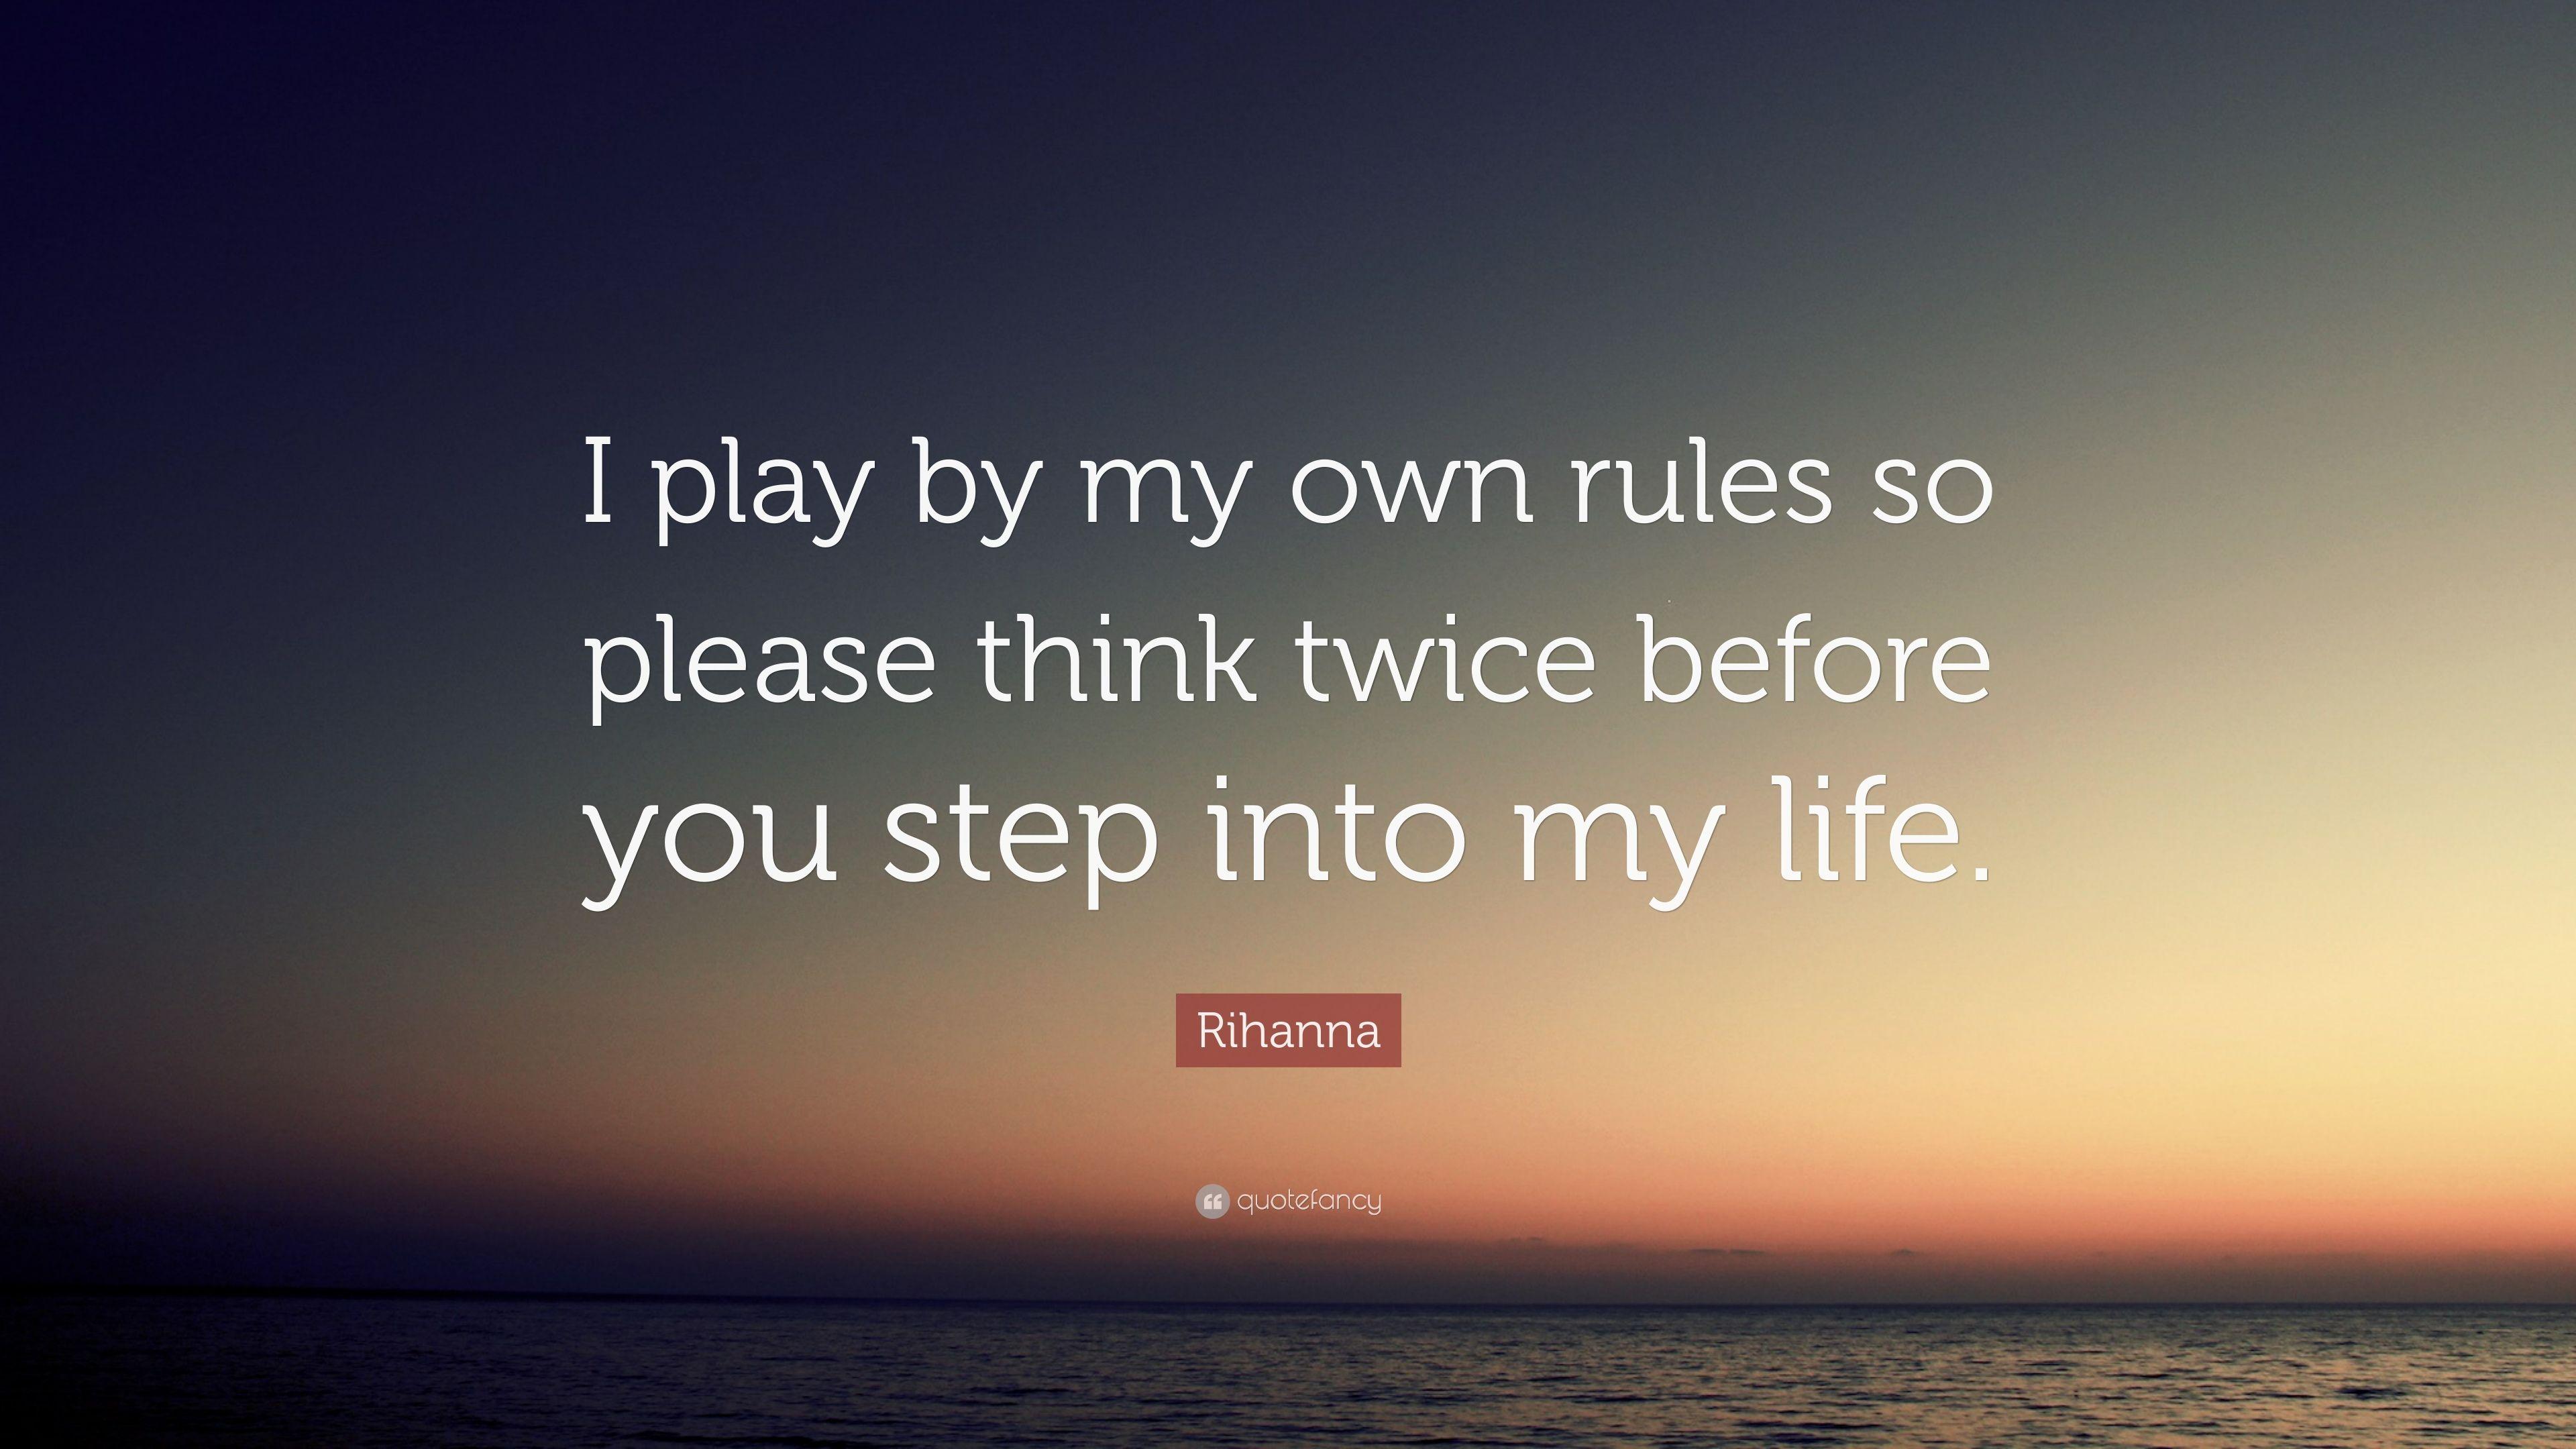 Rihanna Quote: “I play by my own rules so please think twice